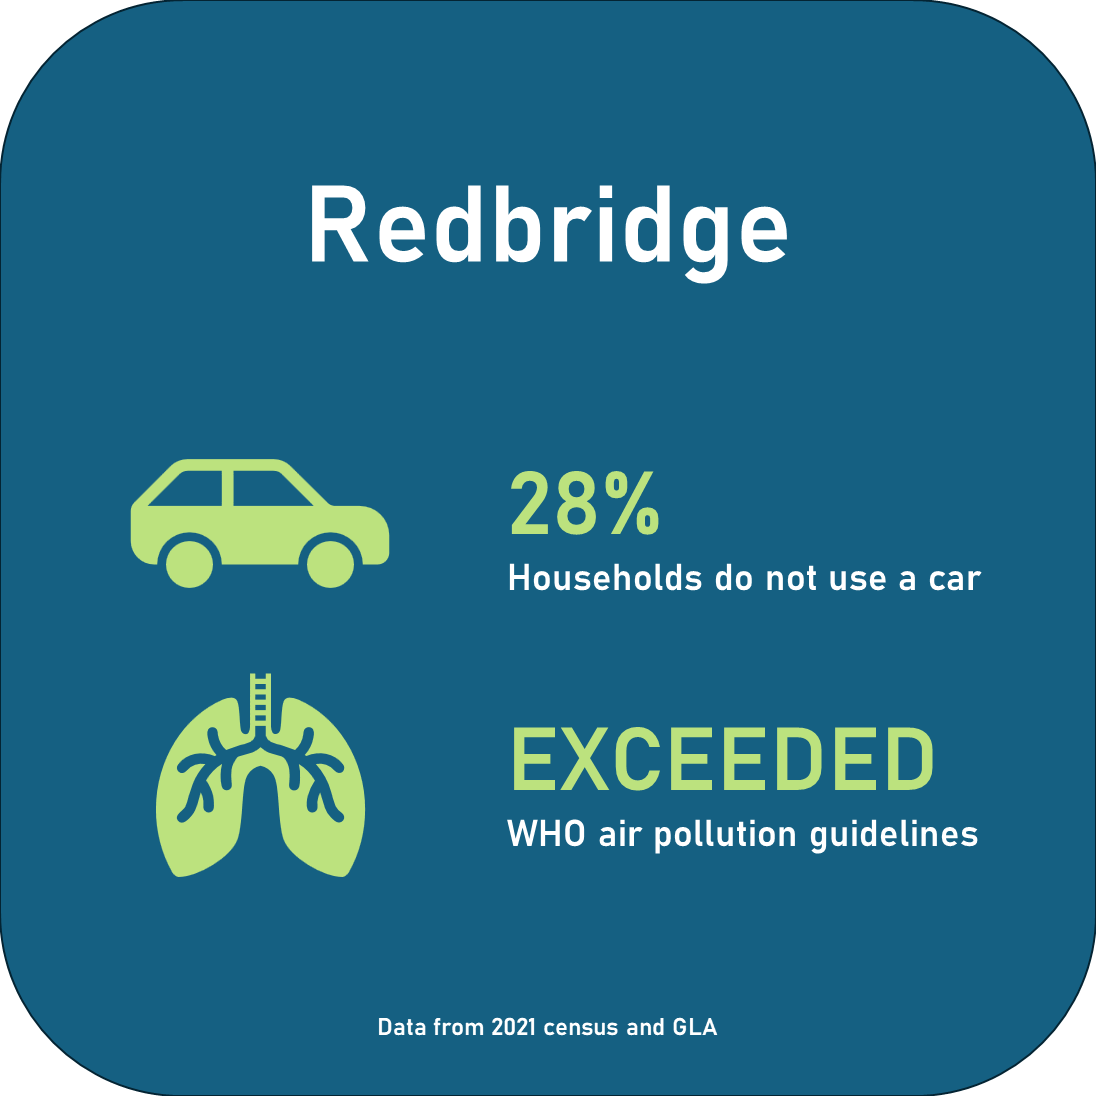 28% households do not use a car. Exceeded WHO air pollution guidelines.